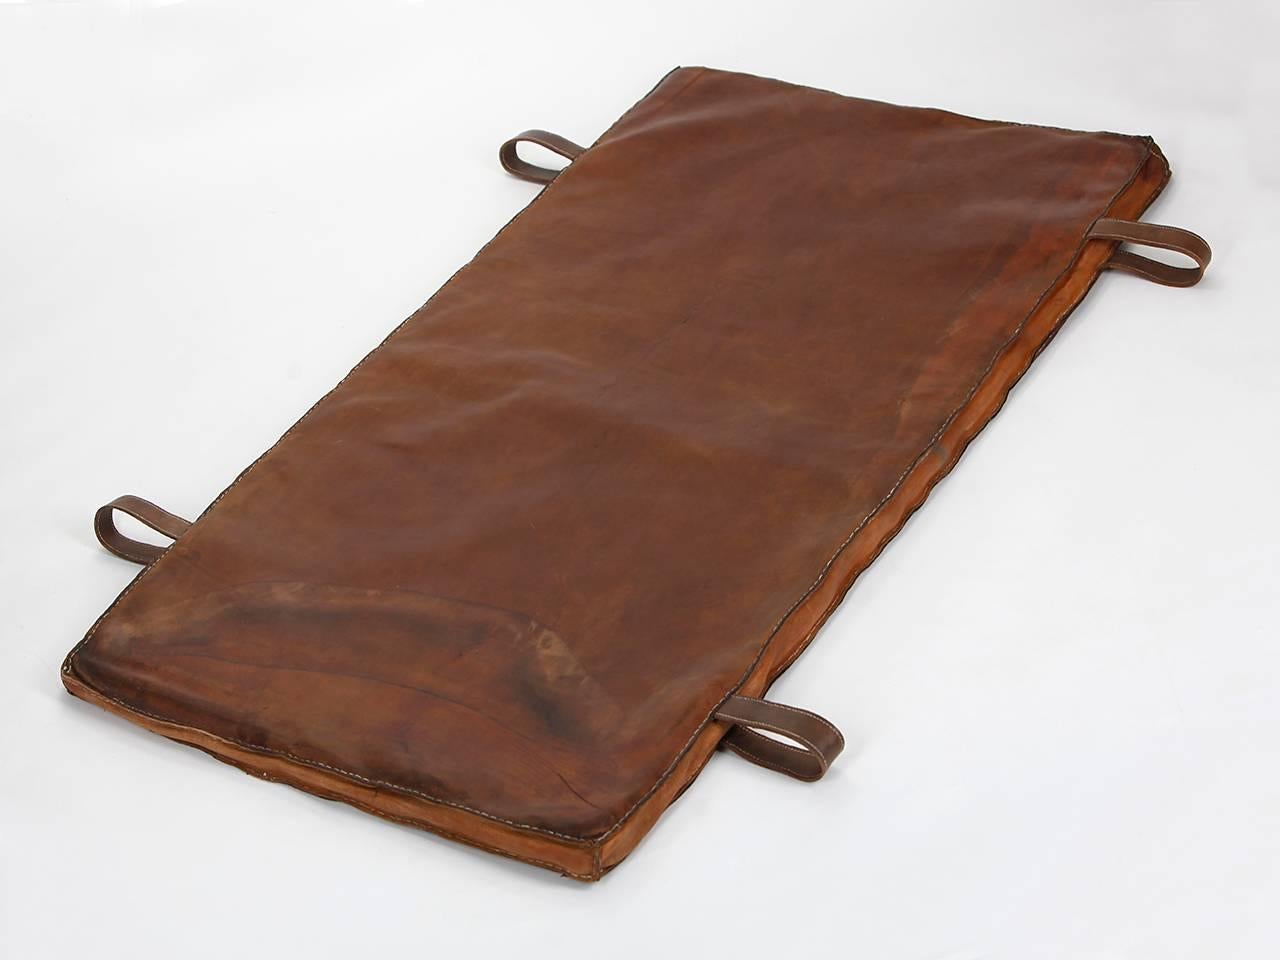 This gymnastic mat from the 1940s comes from an old Prague gym.
The thick cow leather was impregnated, and all sides sewn again. The carrying handles were added. Fully usable beautiful vintage condition.

We offer shop to door delivery worldwide.